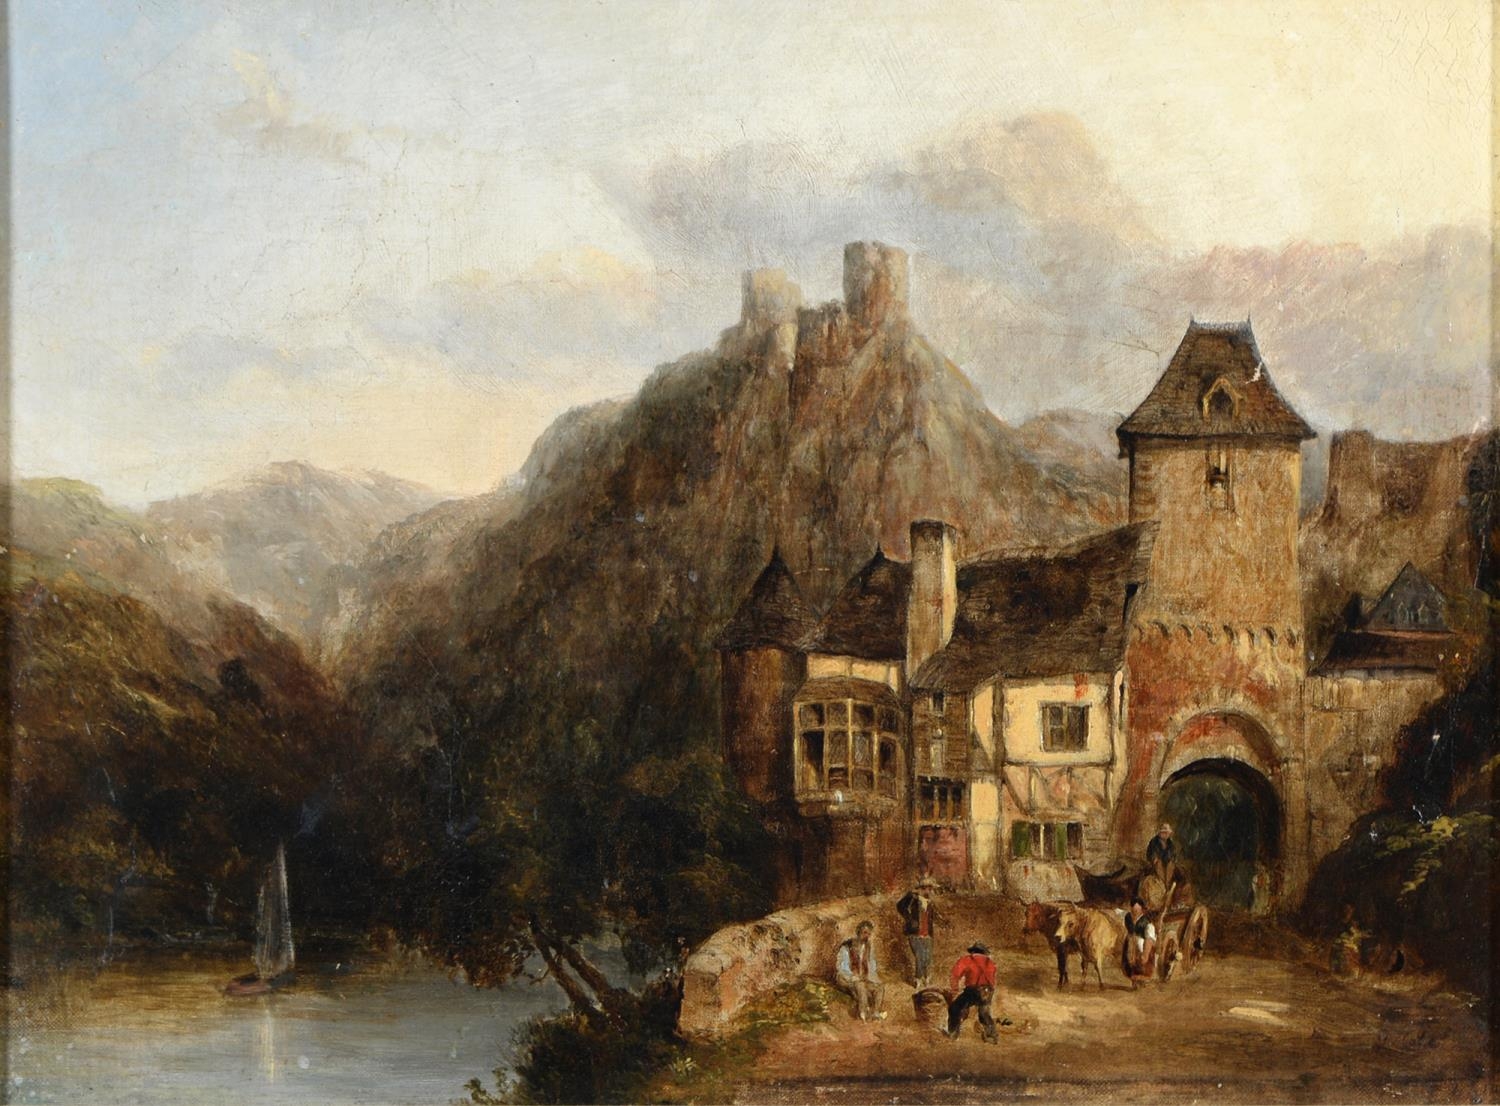 English School, 19th c - Continental Mountainous Landscape with Peasants by a Fortified Gate,